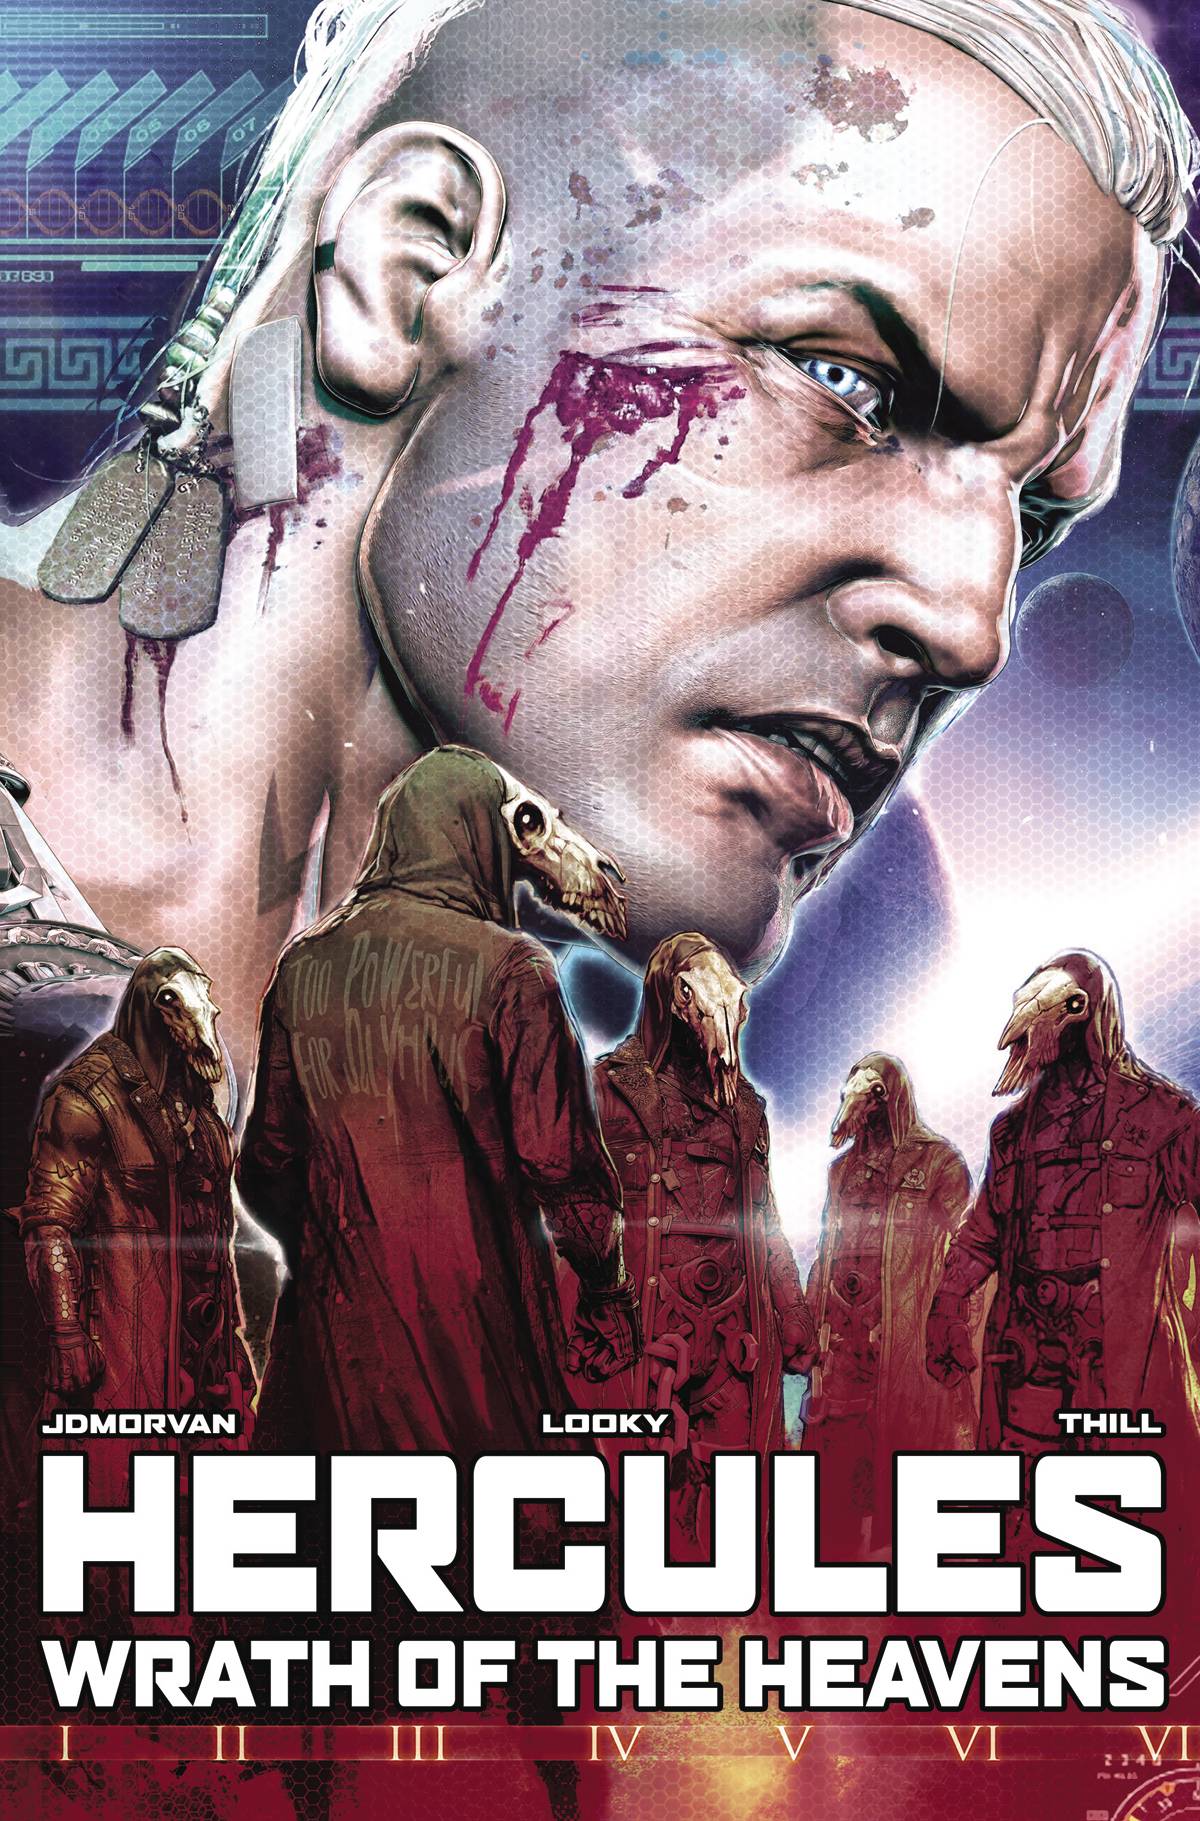 Hercules Wrath of the Heavens #2 Cover A Looky